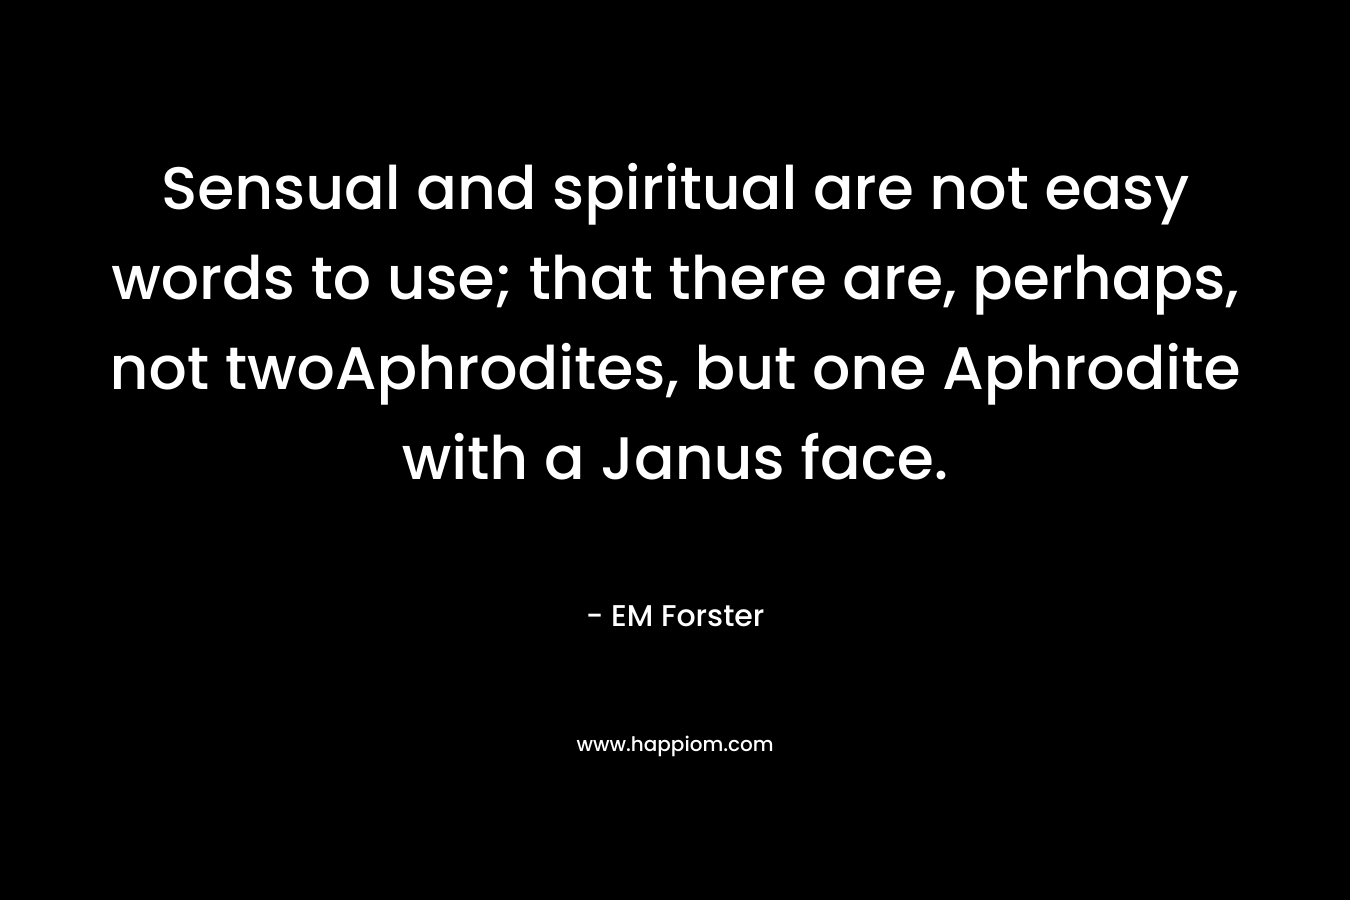 Sensual and spiritual are not easy words to use; that there are, perhaps, not twoAphrodites, but one Aphrodite with a Janus face. – EM Forster